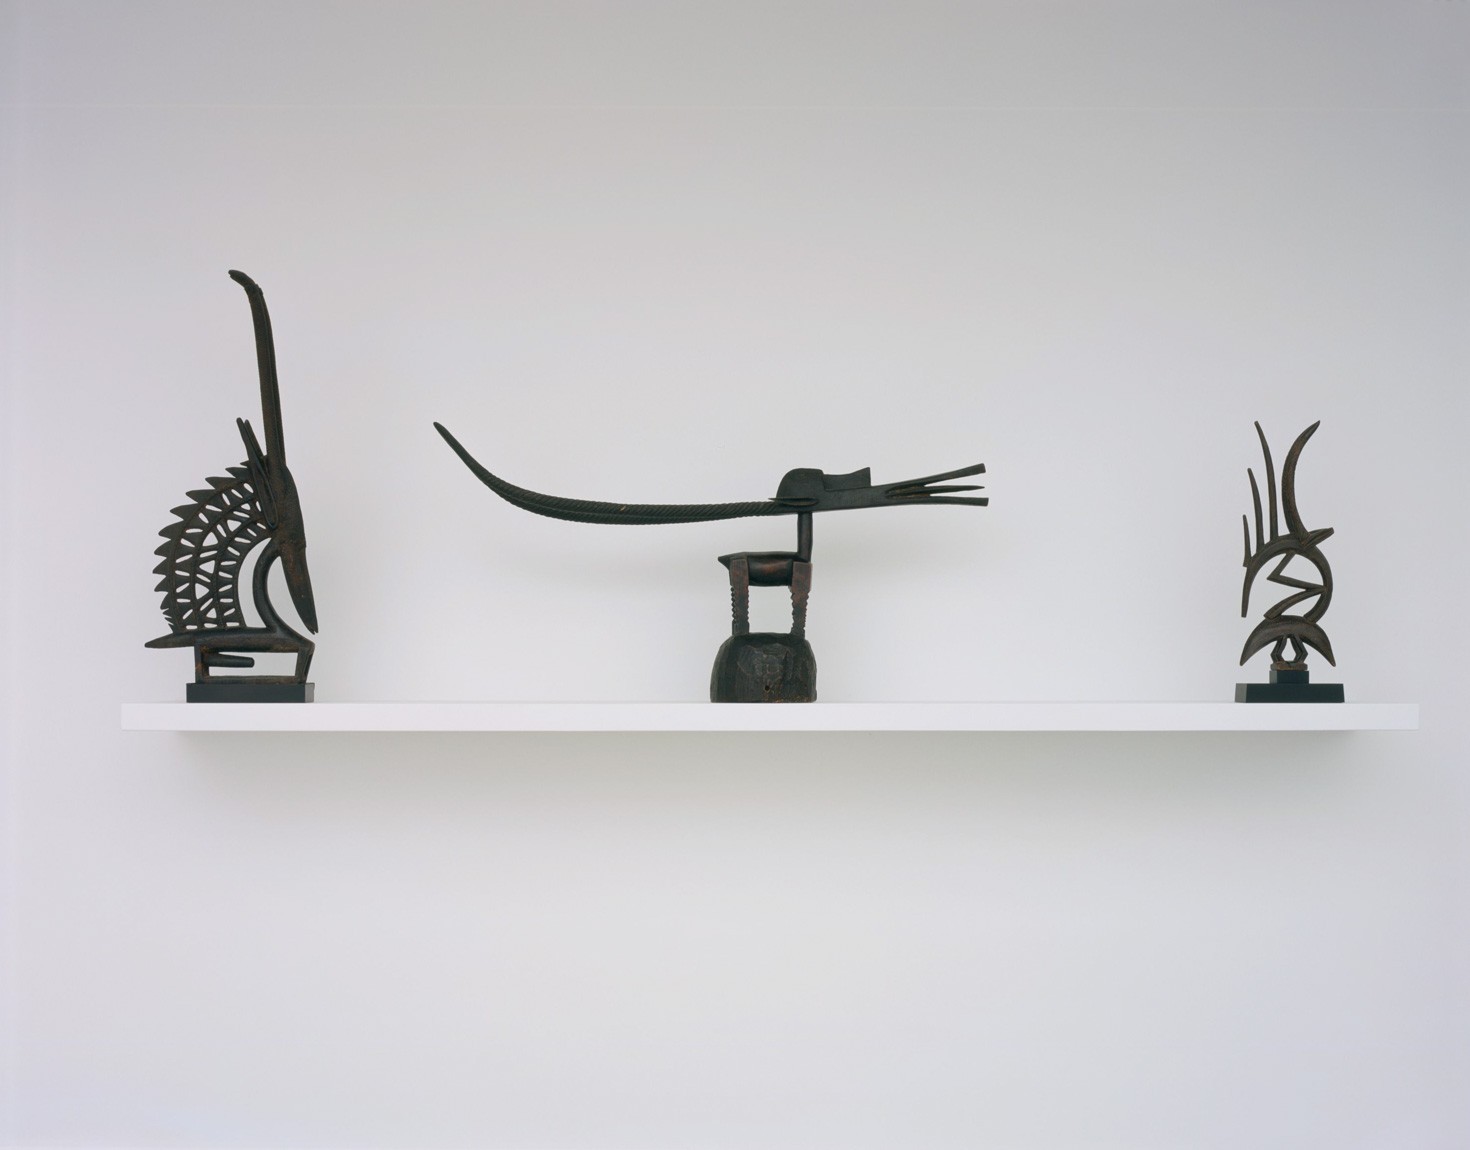 Three sculptures sit on a white shelf in the Lower Galleries.